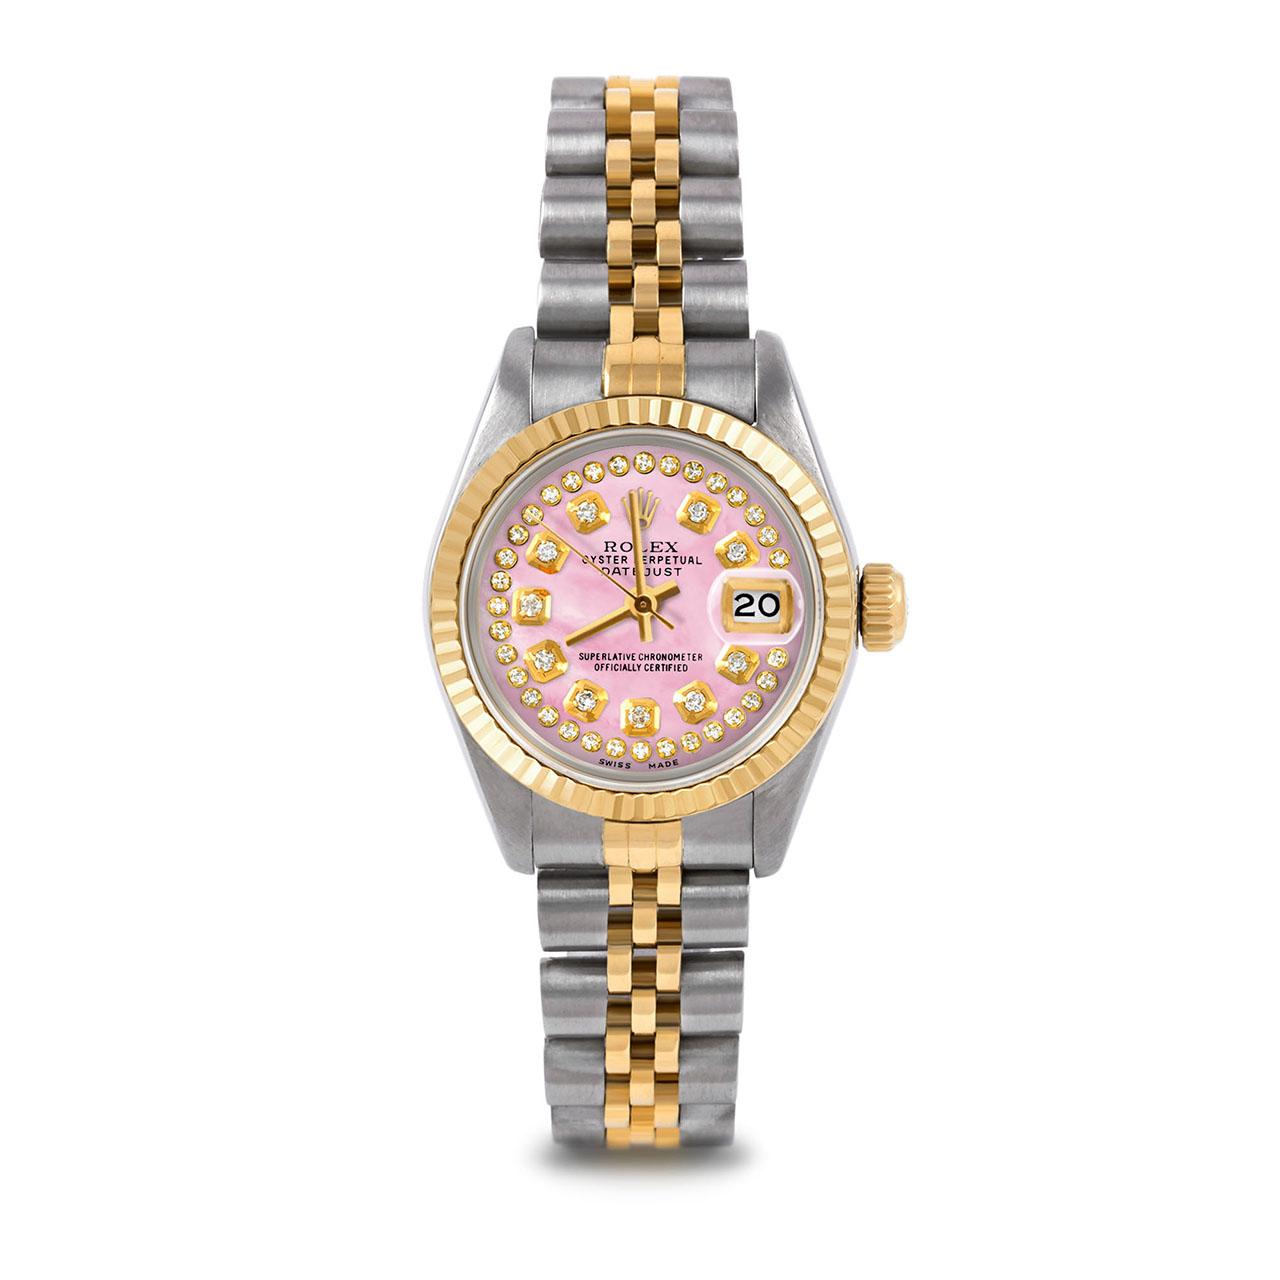 Pre-Owned Rolex 6917 Ladies 26mm Two Tone Datejust Watch, Custom Pink Mother of Pearl String Diamond Dial & Fluted Bezel on Rolex 14K Yellow Gold And Stainless Steel Jubilee Band.   

SKU 6917-TT-PMOP-STRD-FLT-JBL


Brand/Model:        Rolex